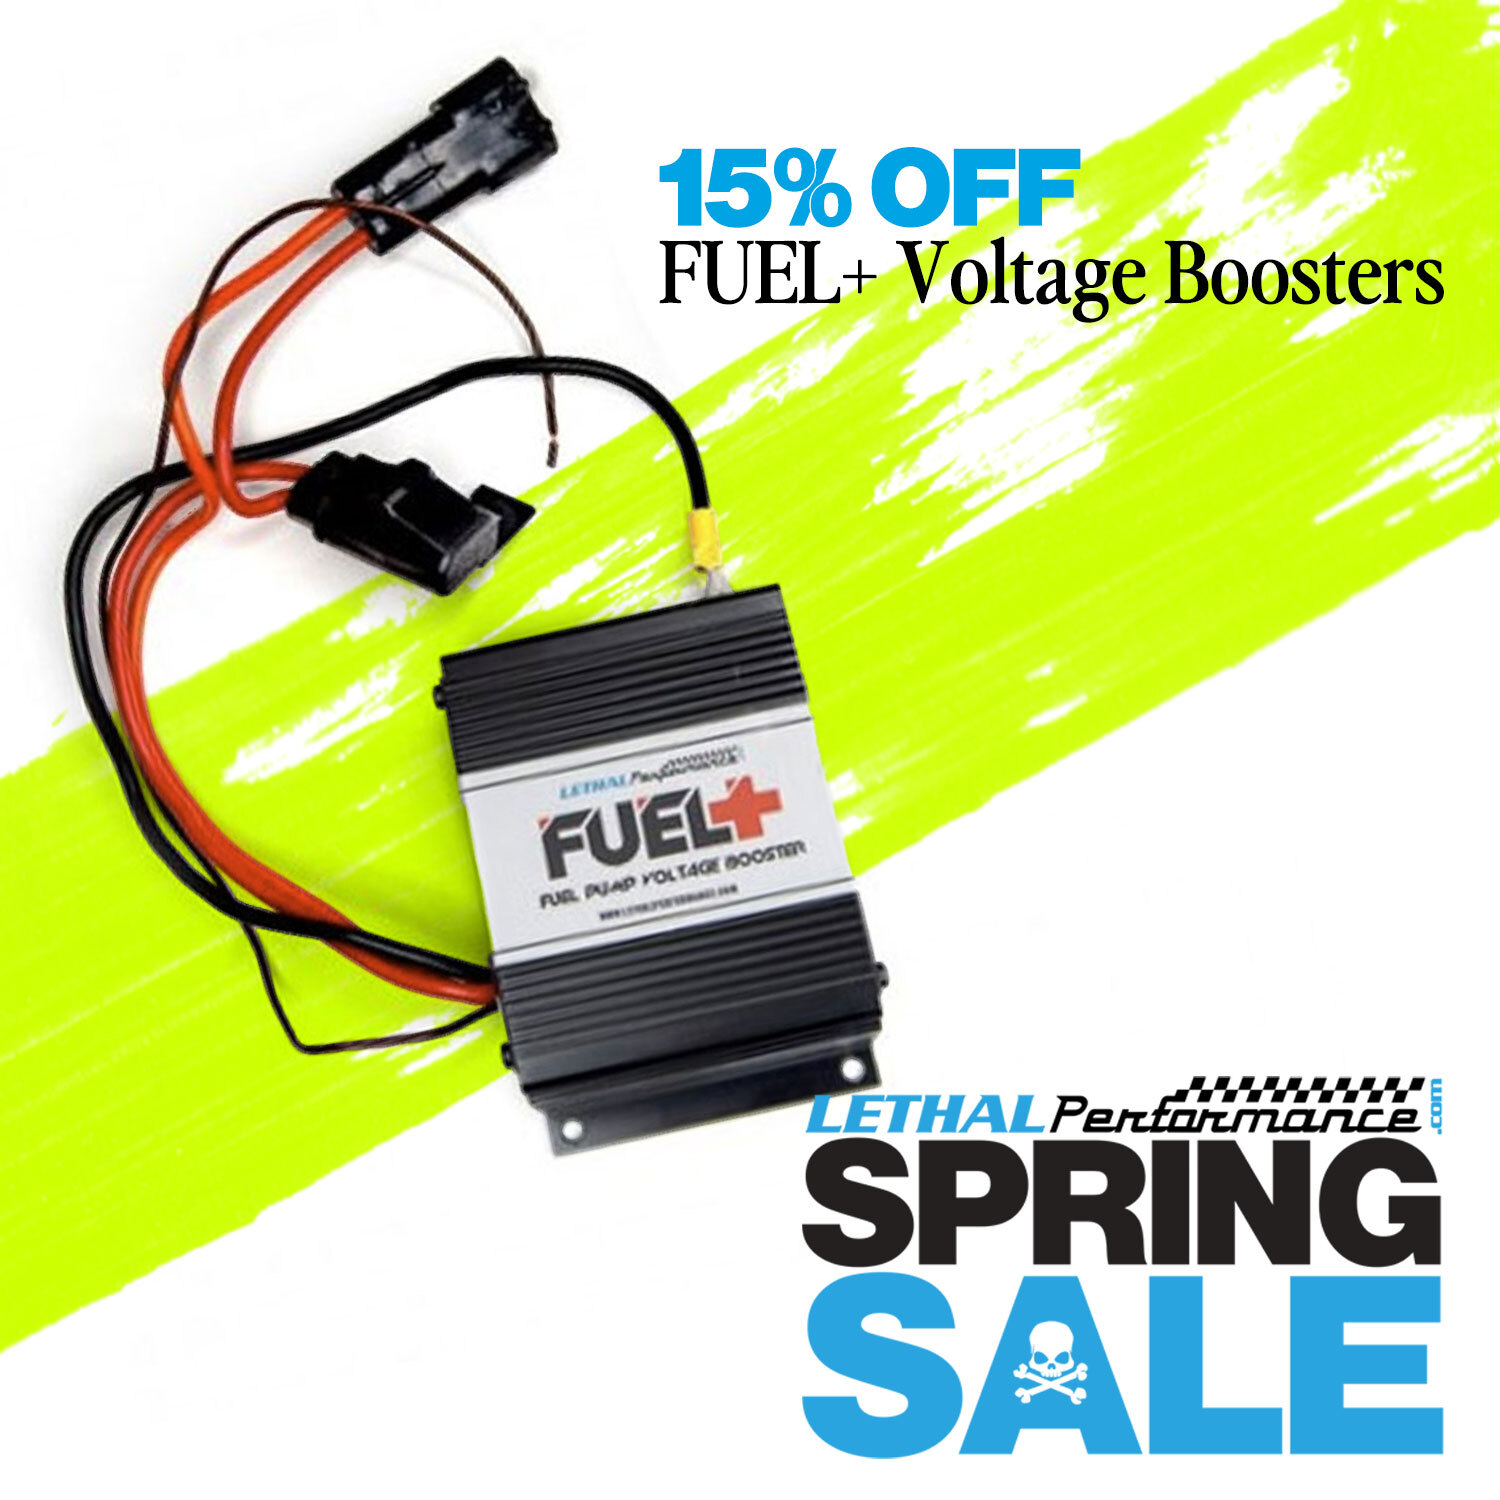 S650 Mustang Spring SALE has SPRUNG here at Lethal Performance!! springsale_fuelplus